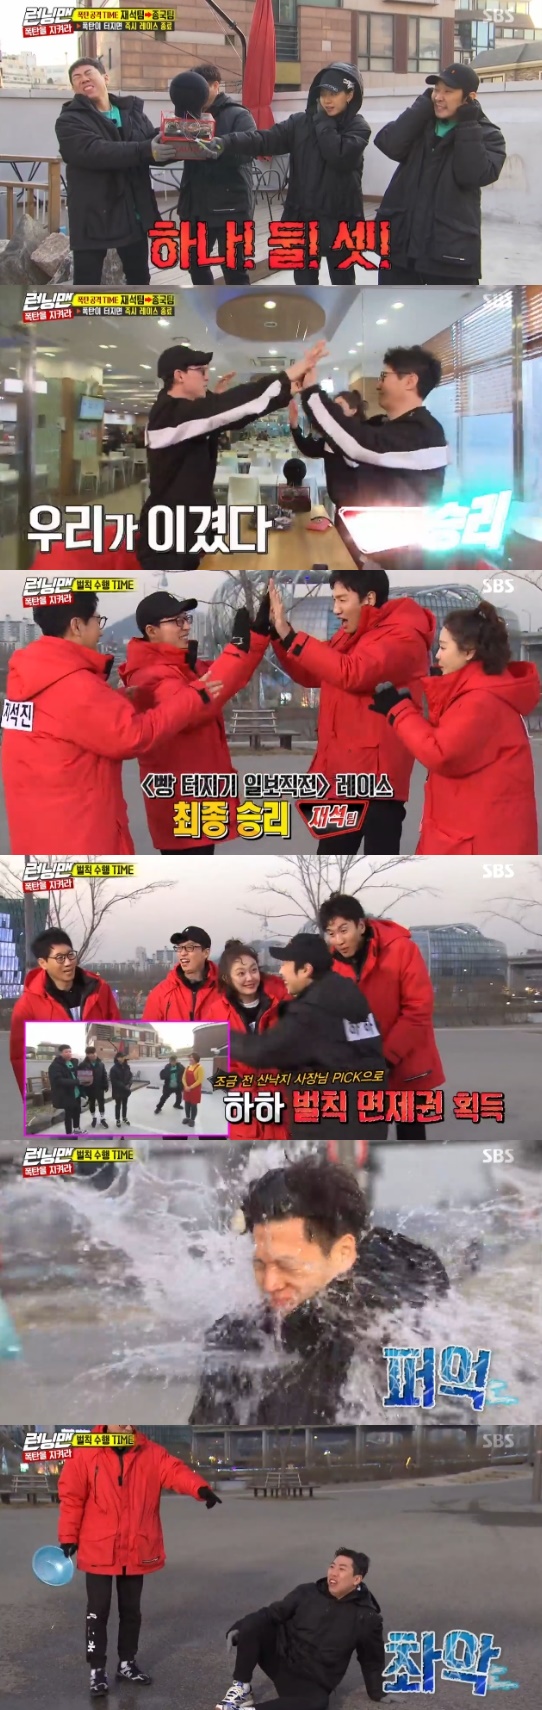 Running Man Park Jae-Seok team wins bomb raceOn the 17th SBS Good Sunday - Running Man, Hong Jin-young appeared in surprise.The crew said they would announce the team they set themselves. It was the order that they entered the opening place.Lee Kwang-soo, Jeon So-min, Yoo Jae-Suk, and Ji Suk-jin laughed at the sound of a team, saying, Let us face each other.Race is a race just before the bread burst, and if you cut off the other persons bomb line, you win. To cut off the bomb line, you can pick one of the unusual Korean foods and eat one person.You can cut a line on your team when you succeed in a mission, you get one chance on your success, and you get one penalty waiver for each team.The unique Korean food chosen by the final team (Kim Jong-kook, Song Ji-hyo, Haha, Yang Se-chan) who won the pre-mission was selected by Pyongyang Cold Noodle, Park Jae-Seok Team (Yoo Jae-Suk, Jeon So-min, Ji Suk-jin, Lee Kwang-soo) Yeah.Each team continued to succeed, but did not find the opponent team bomb line.The Park Jae-Seok team chose the only offensive right of the chance: the rip-off mission; four on the mission, the top model for the opponent team, and the top model price for the number of successes.The Park Jae-Seok team was successful by two, and the final team had to top Model below 6,000 won.The team that chose the mountain octopus chose the lowest price among the chances for the price reduction. The minimum price acquisition mission was Nice Friend, and the mission was successful with the acquaintance.The team first recalled the Running Man family, Lee Sang-yeop, but could not reach him; the team then went to Hong Jin-young, who was filming nearby.Hong Jin-young wrote the crown in question and succeeded in the stricken snack mission, and the team finally won the lowest price.Park Jae-Seok team had to eat for less than 5,900 won, and fortunately, Jeon So-min found 4,500 won six-time bibimbap at a university restaurant.The Park Jae-Seok team then chose the red bomb line of the team and succeeded in attacking.Haha won a penalty waiver, and the winning Park Jae-Seok team hit Kim Jong-kook, Song Ji-hyo and Yang Se-chan with the exception of Haha.Photo = SBS Broadcasting Screen